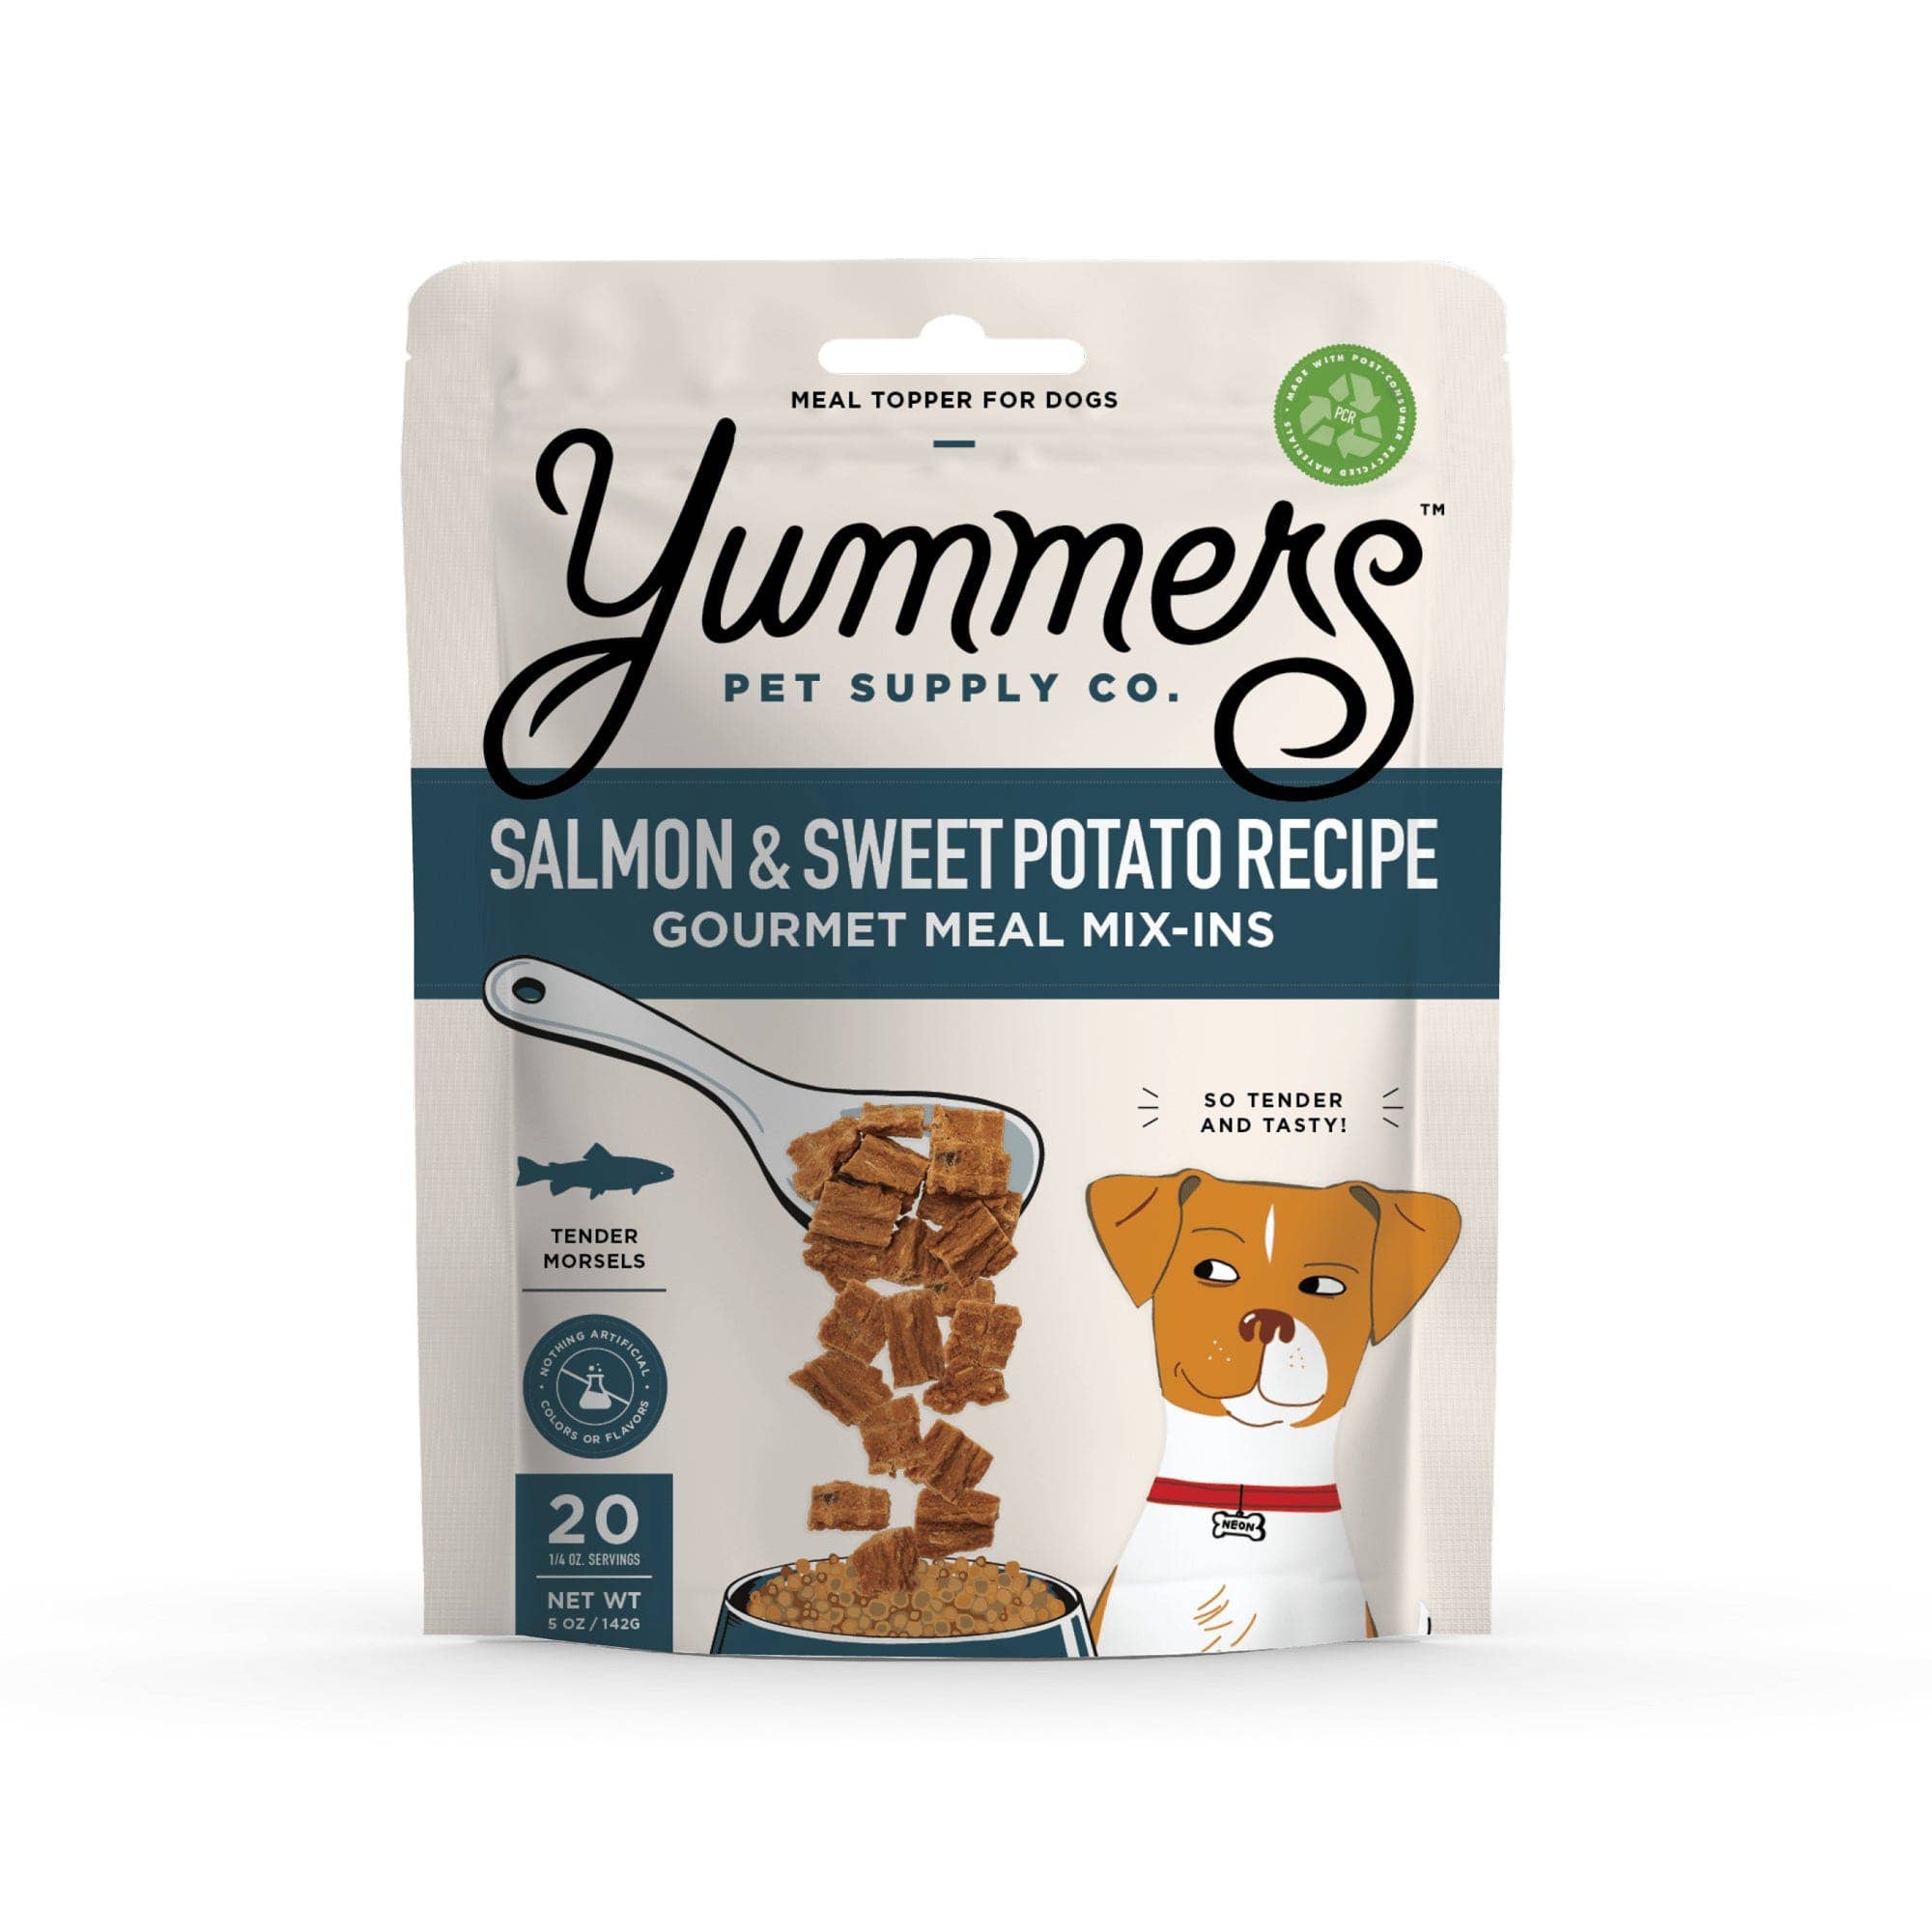 Yummers - Salmon & Sweet Potato Recipe Gourmet Meal Mix-in for Dogs, 5 oz.